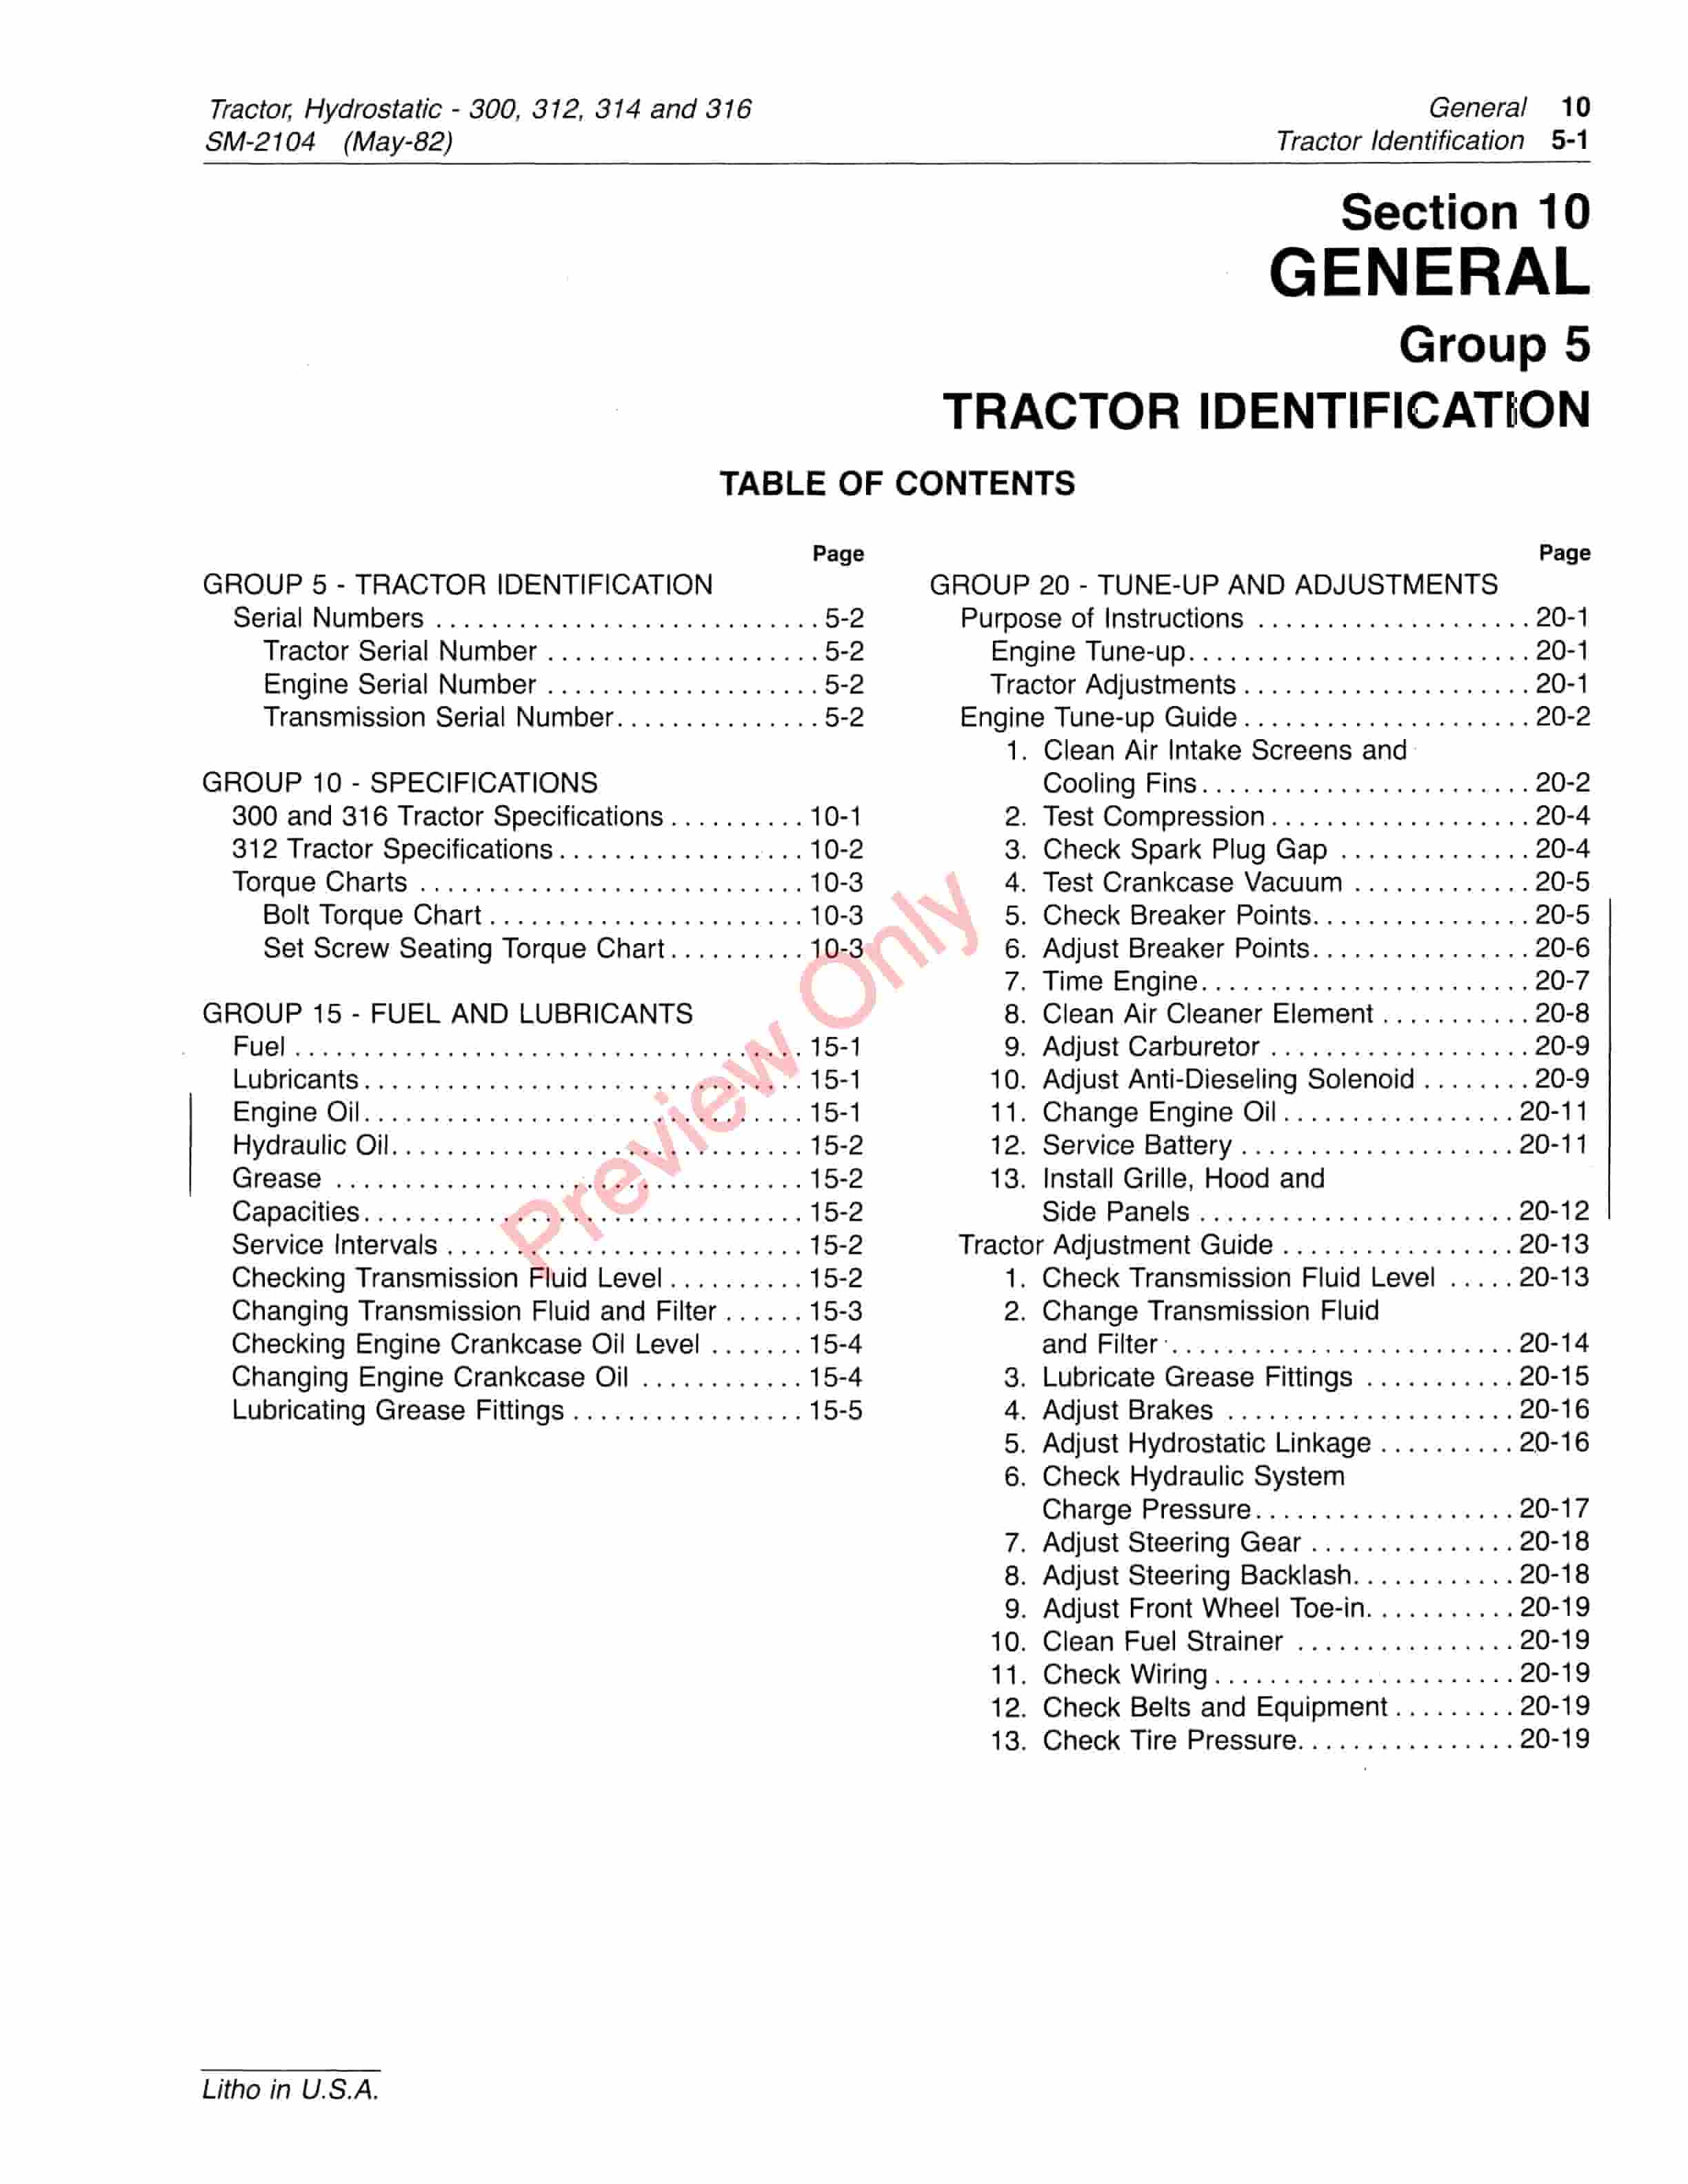 John Deere 300 312 314 And 316 Hydrostatic Lawn And Garden Tractors Service Manual SM2104 01MAY82 5